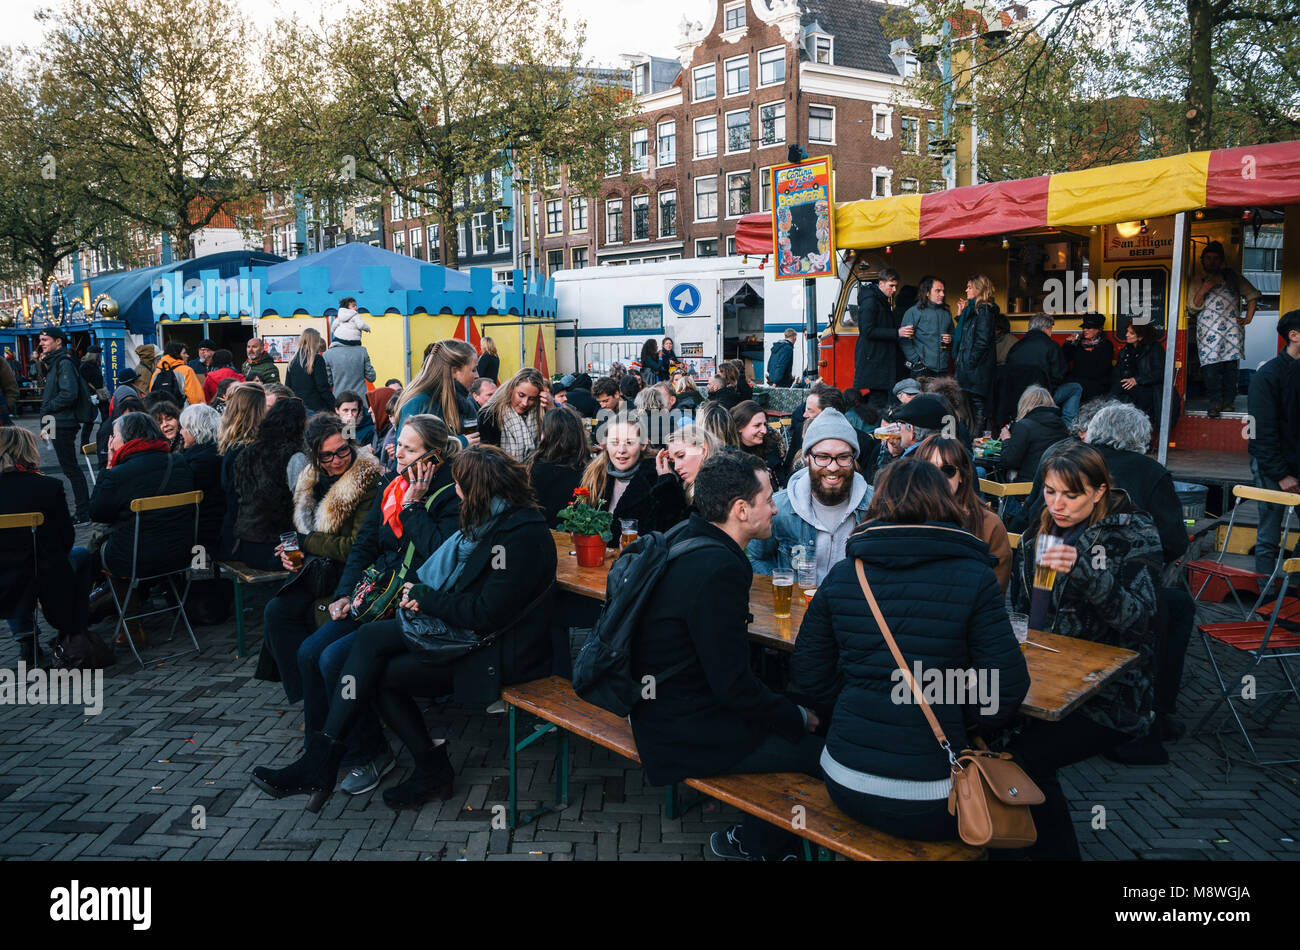 Amsterdam, Netherlands - April 25, 2017:People in outdoor cafe on crowded Nieuwmarkt New Market square in center of Amsterdam, Netherlands. Stock Photo